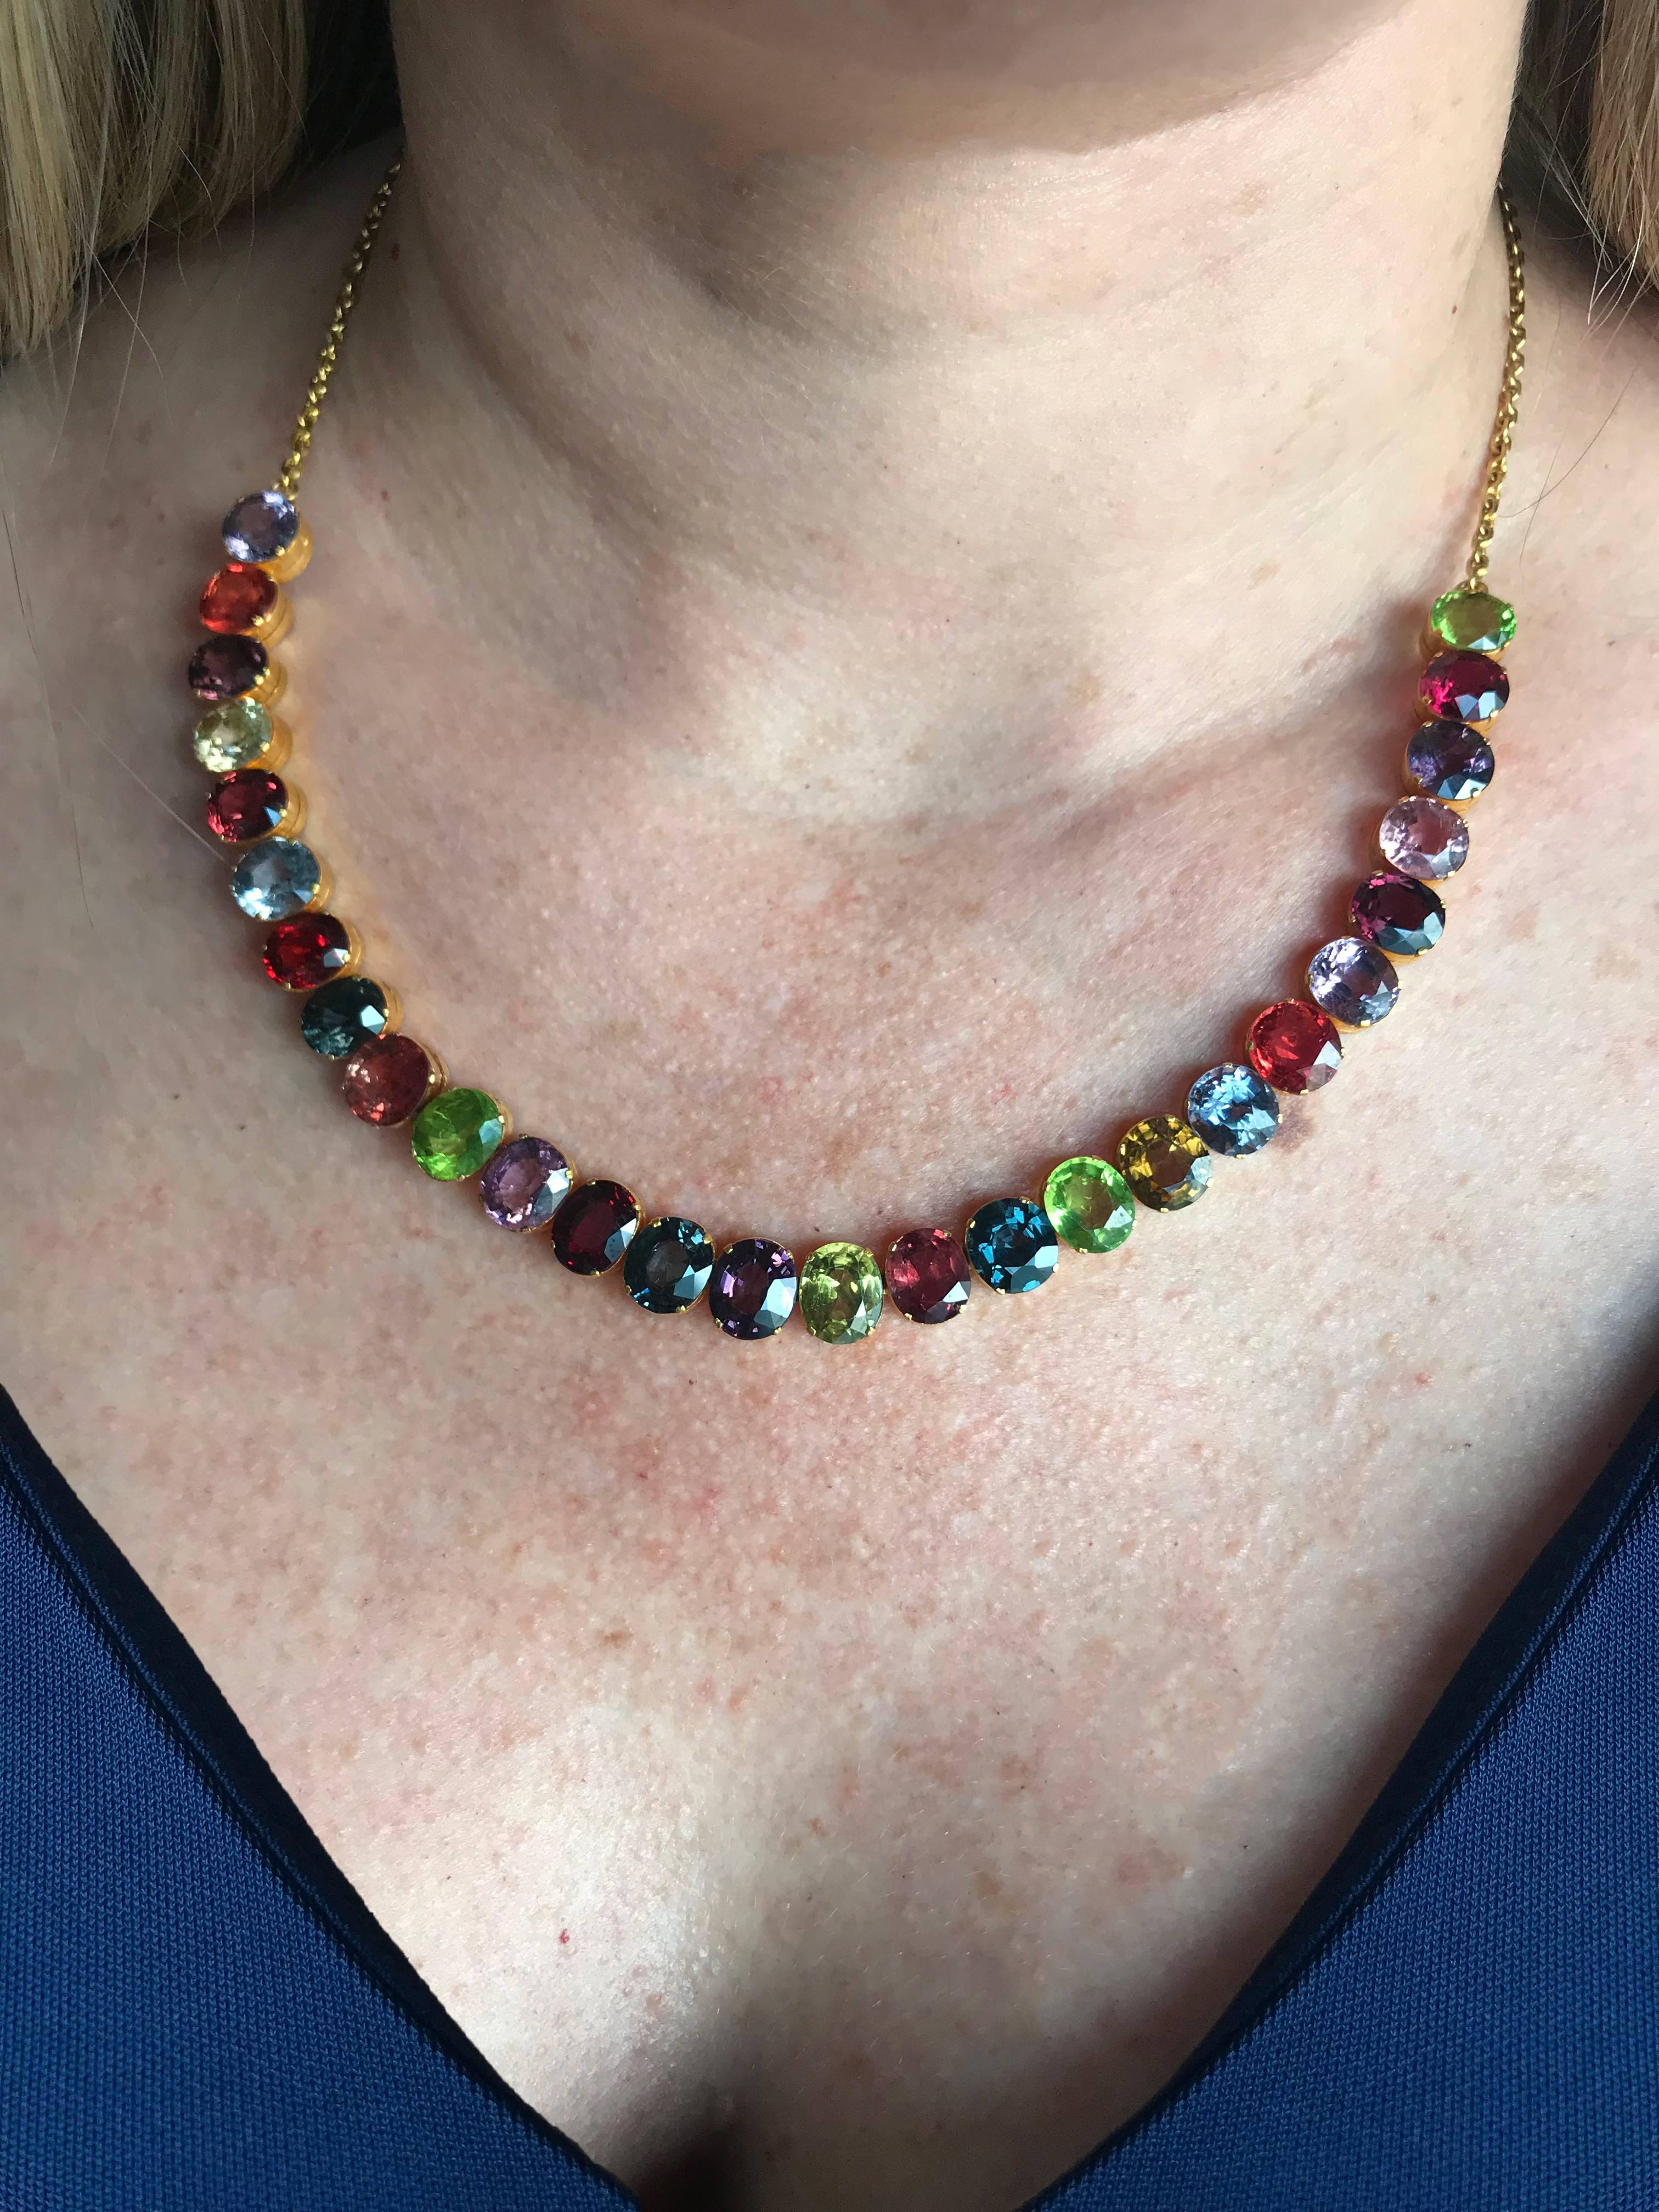 18k yellow gold necklace featuring 27 oval cut Rhodolite, Pyrope and Tsavorite garnets weighing approximately 40cts total. This stunning necklace measures 18 inches in length and measures 9mm at the widest to 1.6mm at the thinnest Garnets come in a